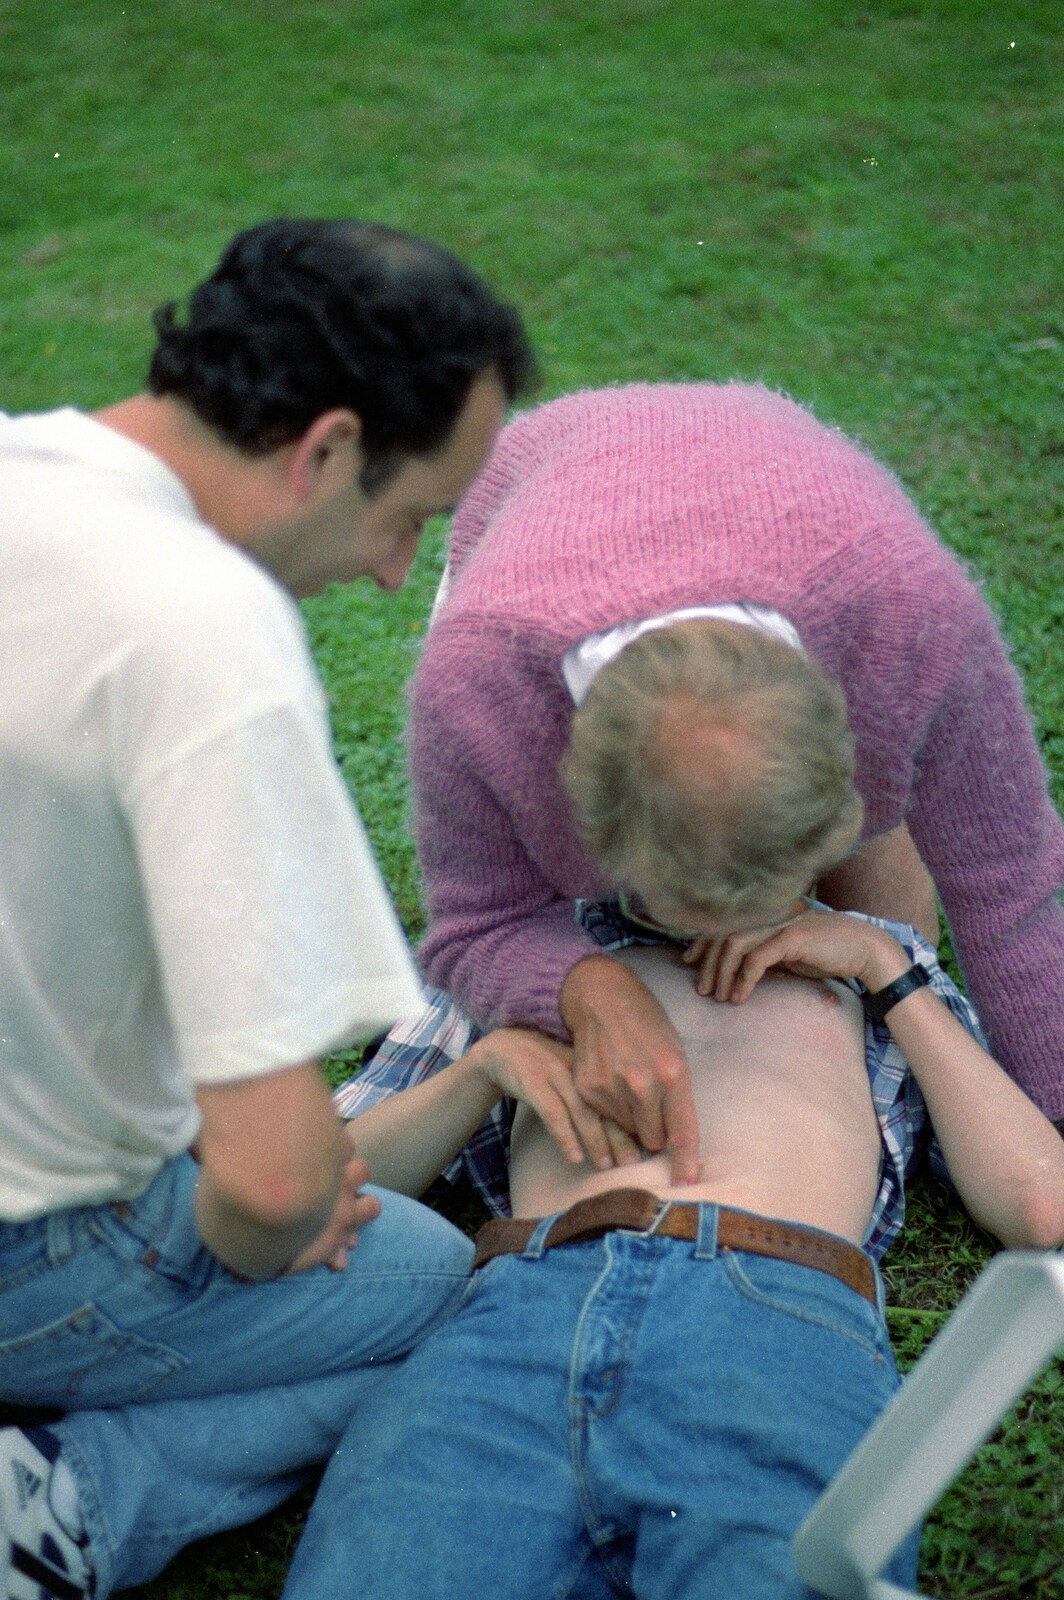 John Willy pokes Apple's belly button from DH's Barbeque at The Swan Inn, Brome, Suffolk - July 14th 1996